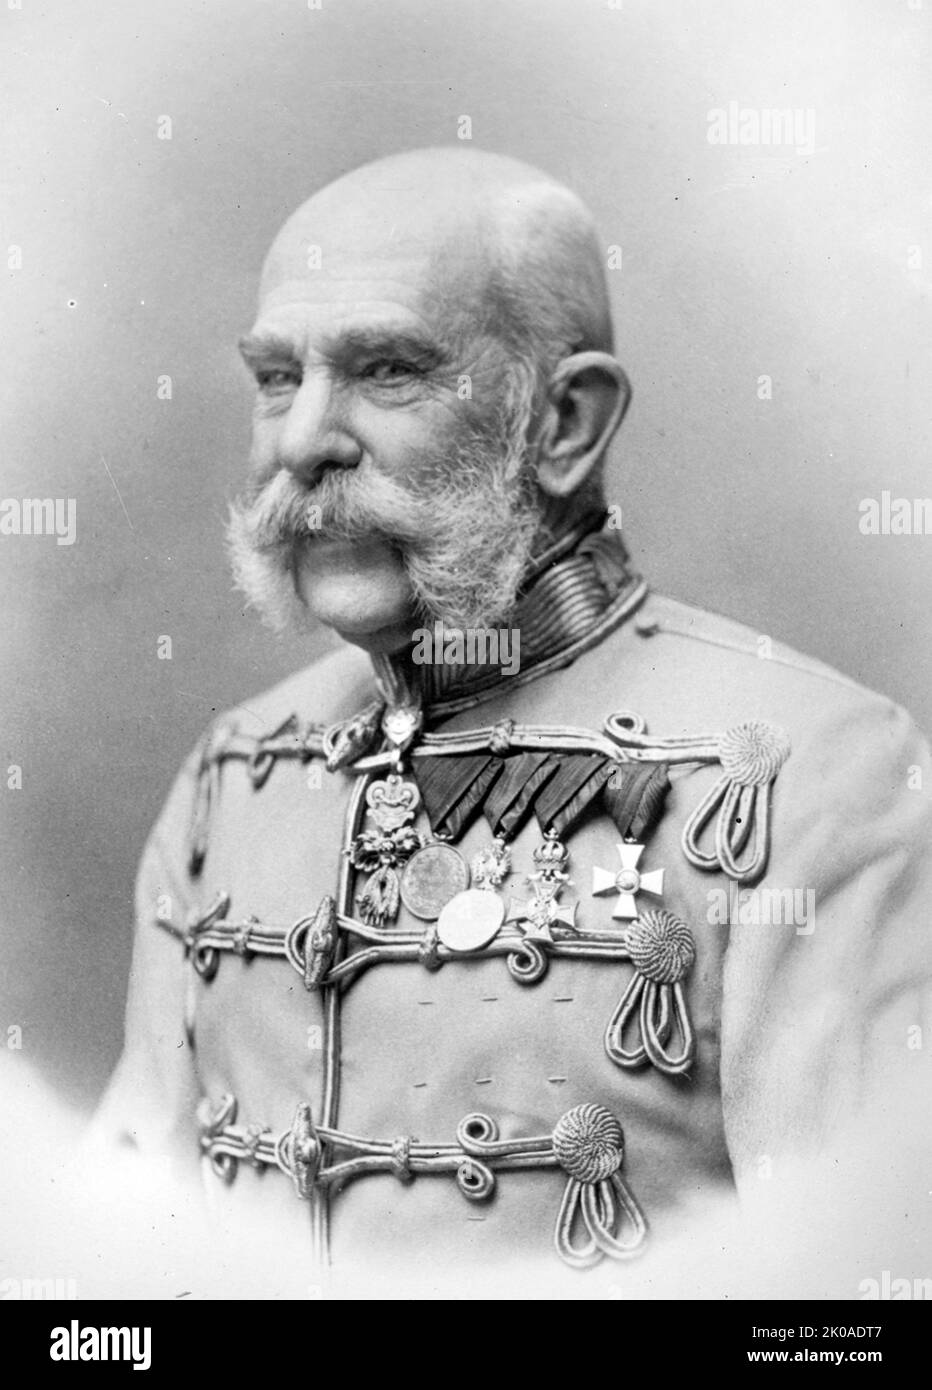 Franz Joseph I or Francis Joseph I (1830 - 21 November 1916) Emperor of Austria, King of Hungary, and the other states of the Austro-Hungarian Empire from 2 December 1848 until his death Stock Photo